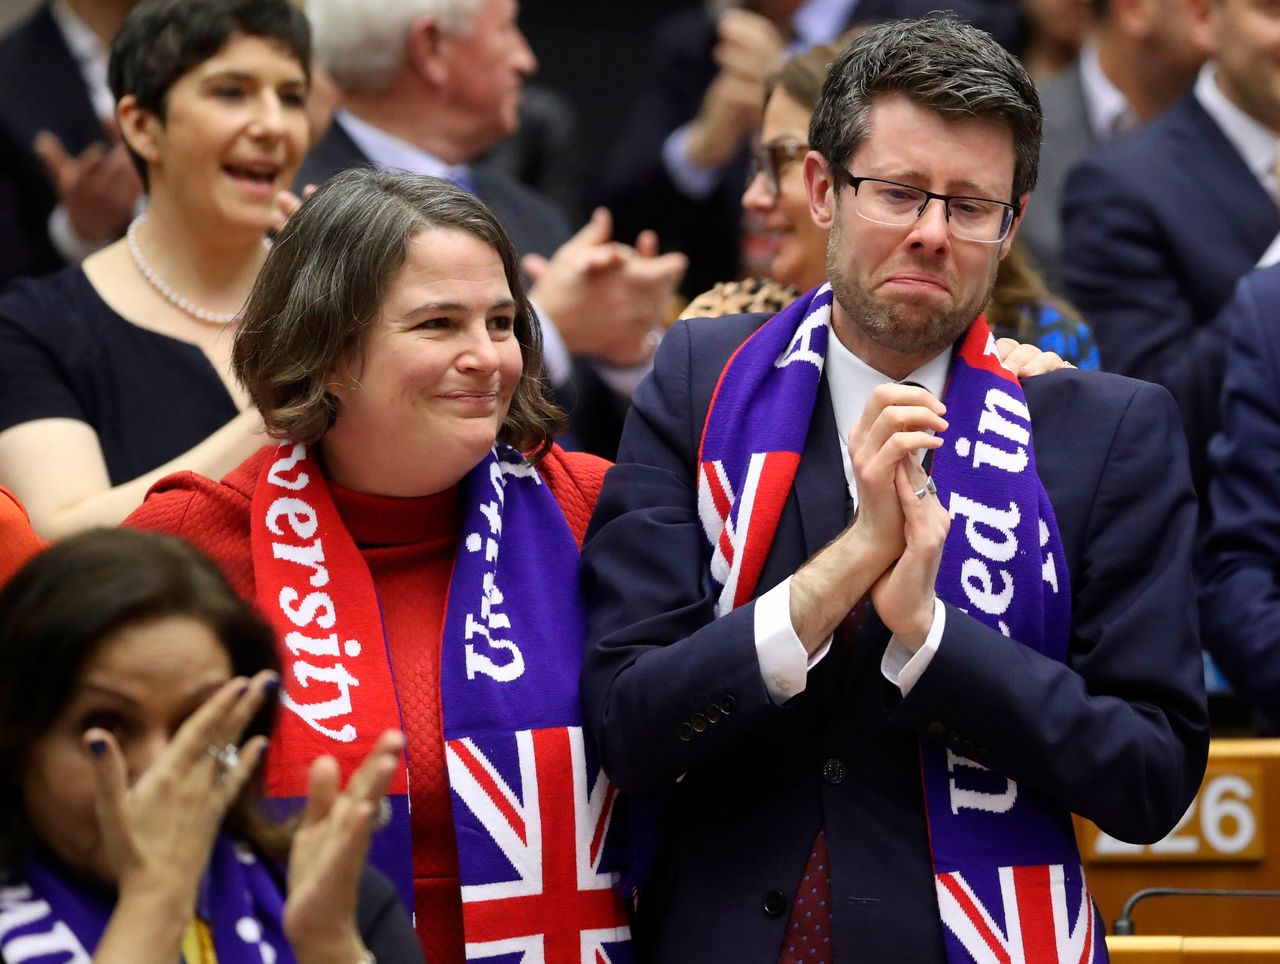 Rory Palmer (R) and Jude Kirton-Darling (L) react after the European Parliament ratified the Brexit deal during a plenary session at the European Parliament in Brussels on January 29, 2020